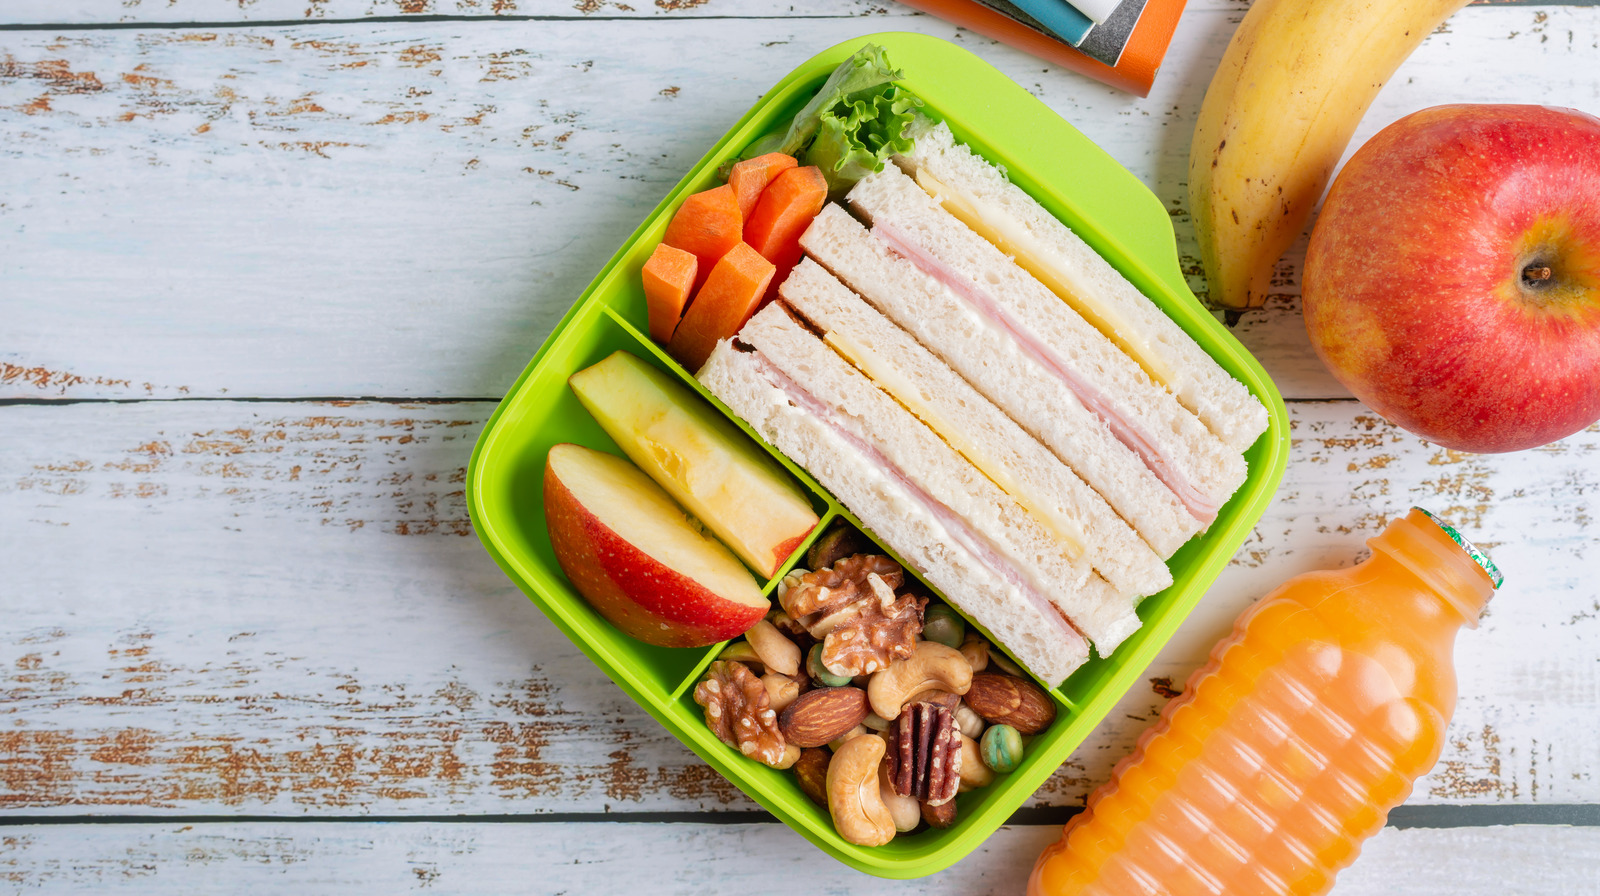 How to Keep Your Lunch Box Cold: 9 Tips So Food Stays Cold